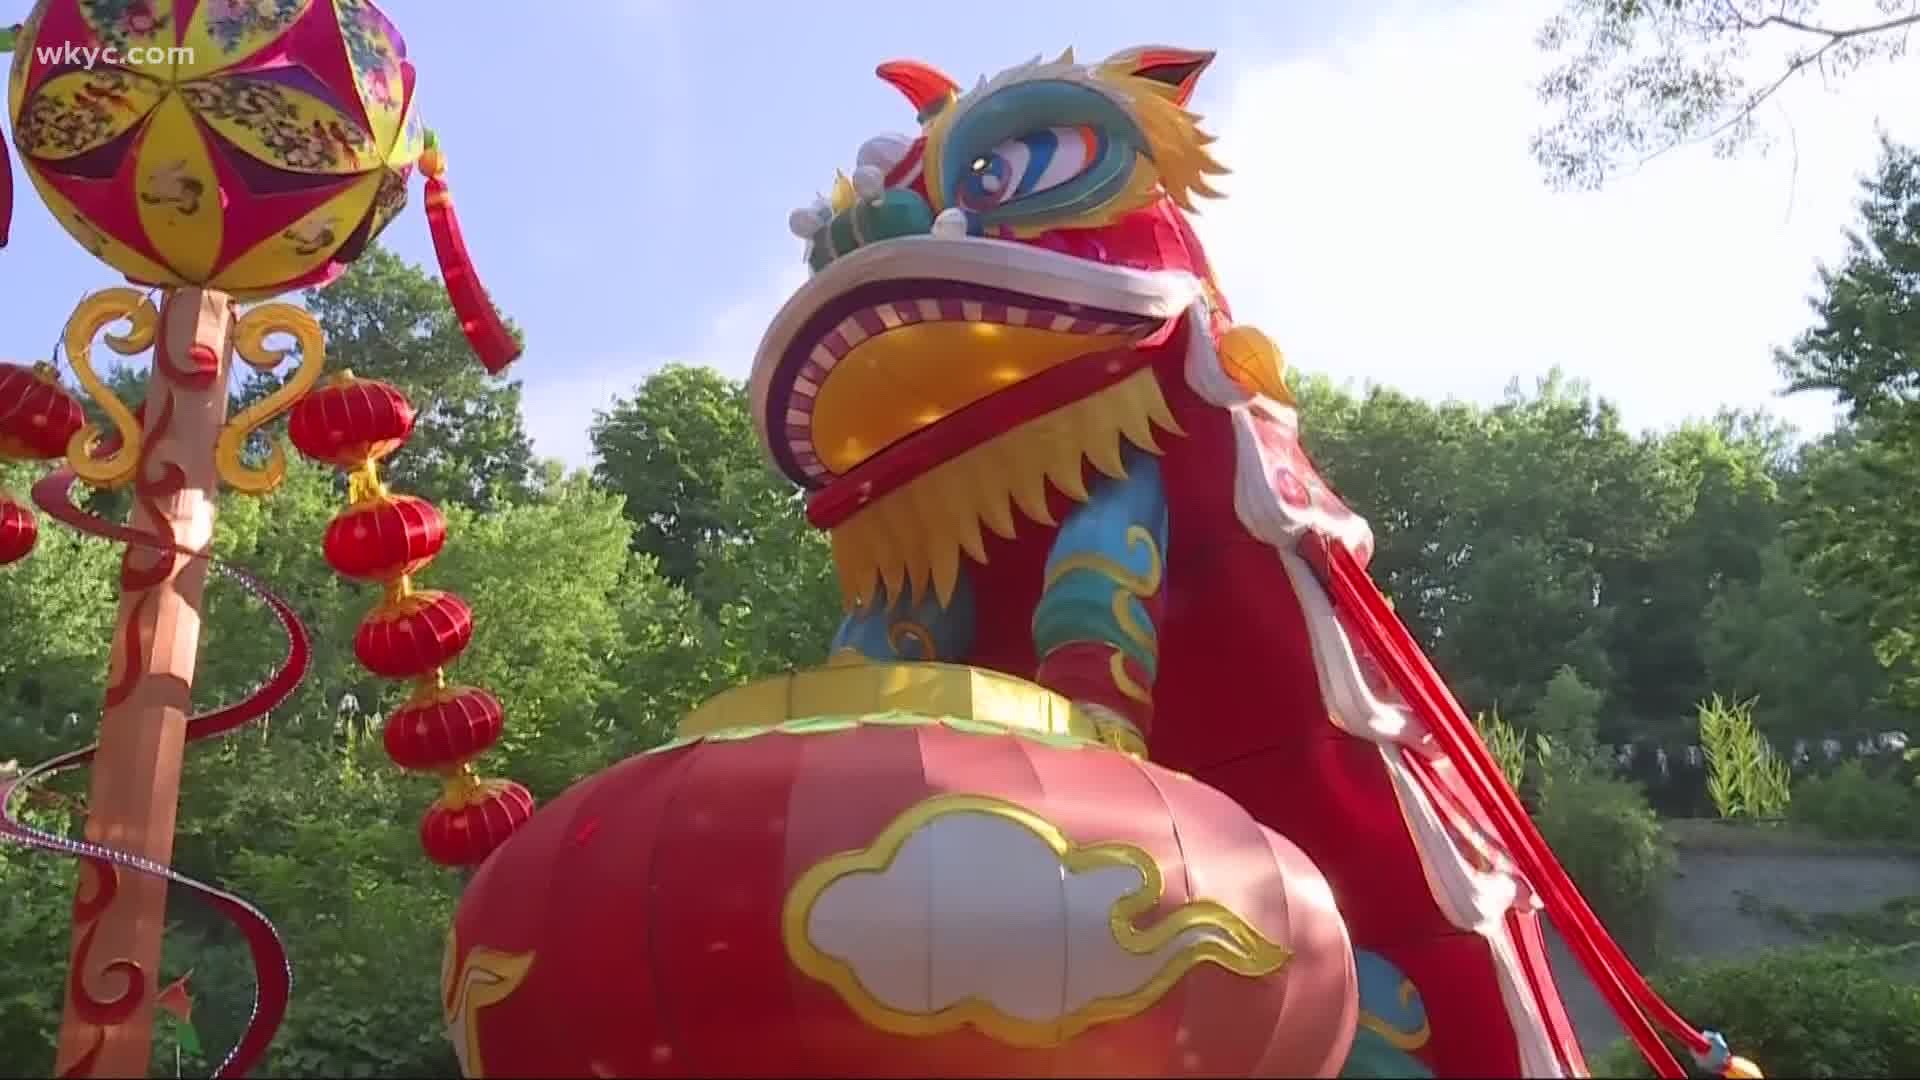 The Asian Lantern Festival is returning to the Cleveland Metroparks Zoo from July 14 through Sept. 5.